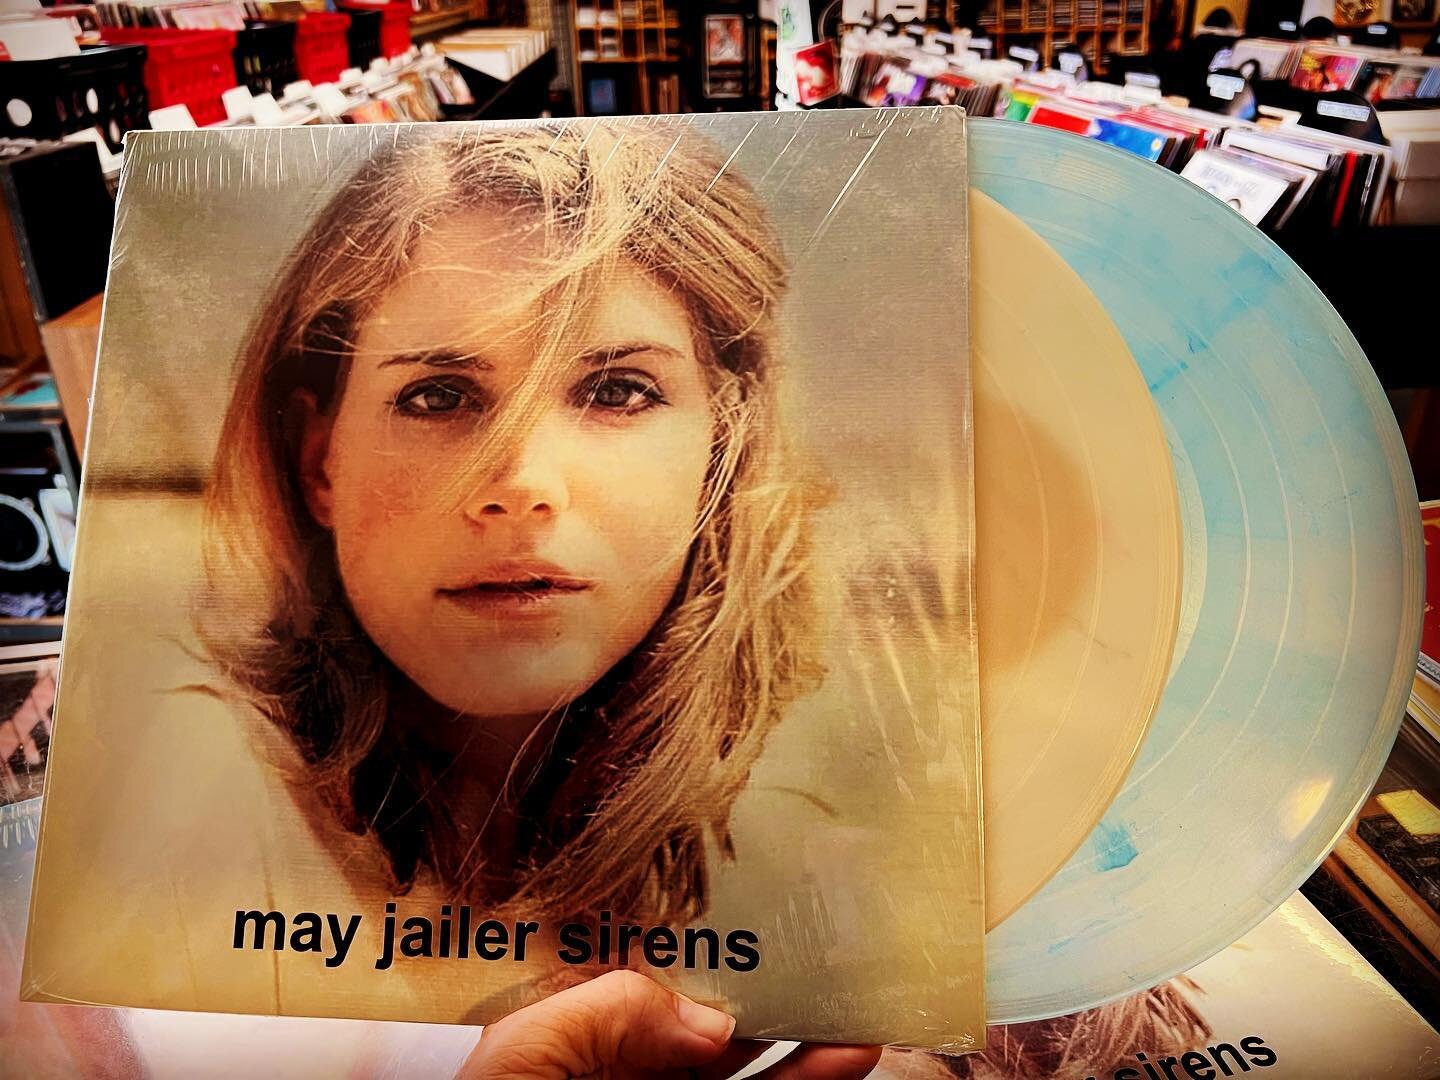 MAY JAILER aka LANA DEL REY &ldquo;sirens&rdquo; double LP on colored vinyl.  Only have a few of these available&hellip;..PM, call, or stop in the shop to grab a copy.  #lanadelrey #lanadelreyfans #indie #indiemusic #mayjailer #coloredvinyl #vinylrec